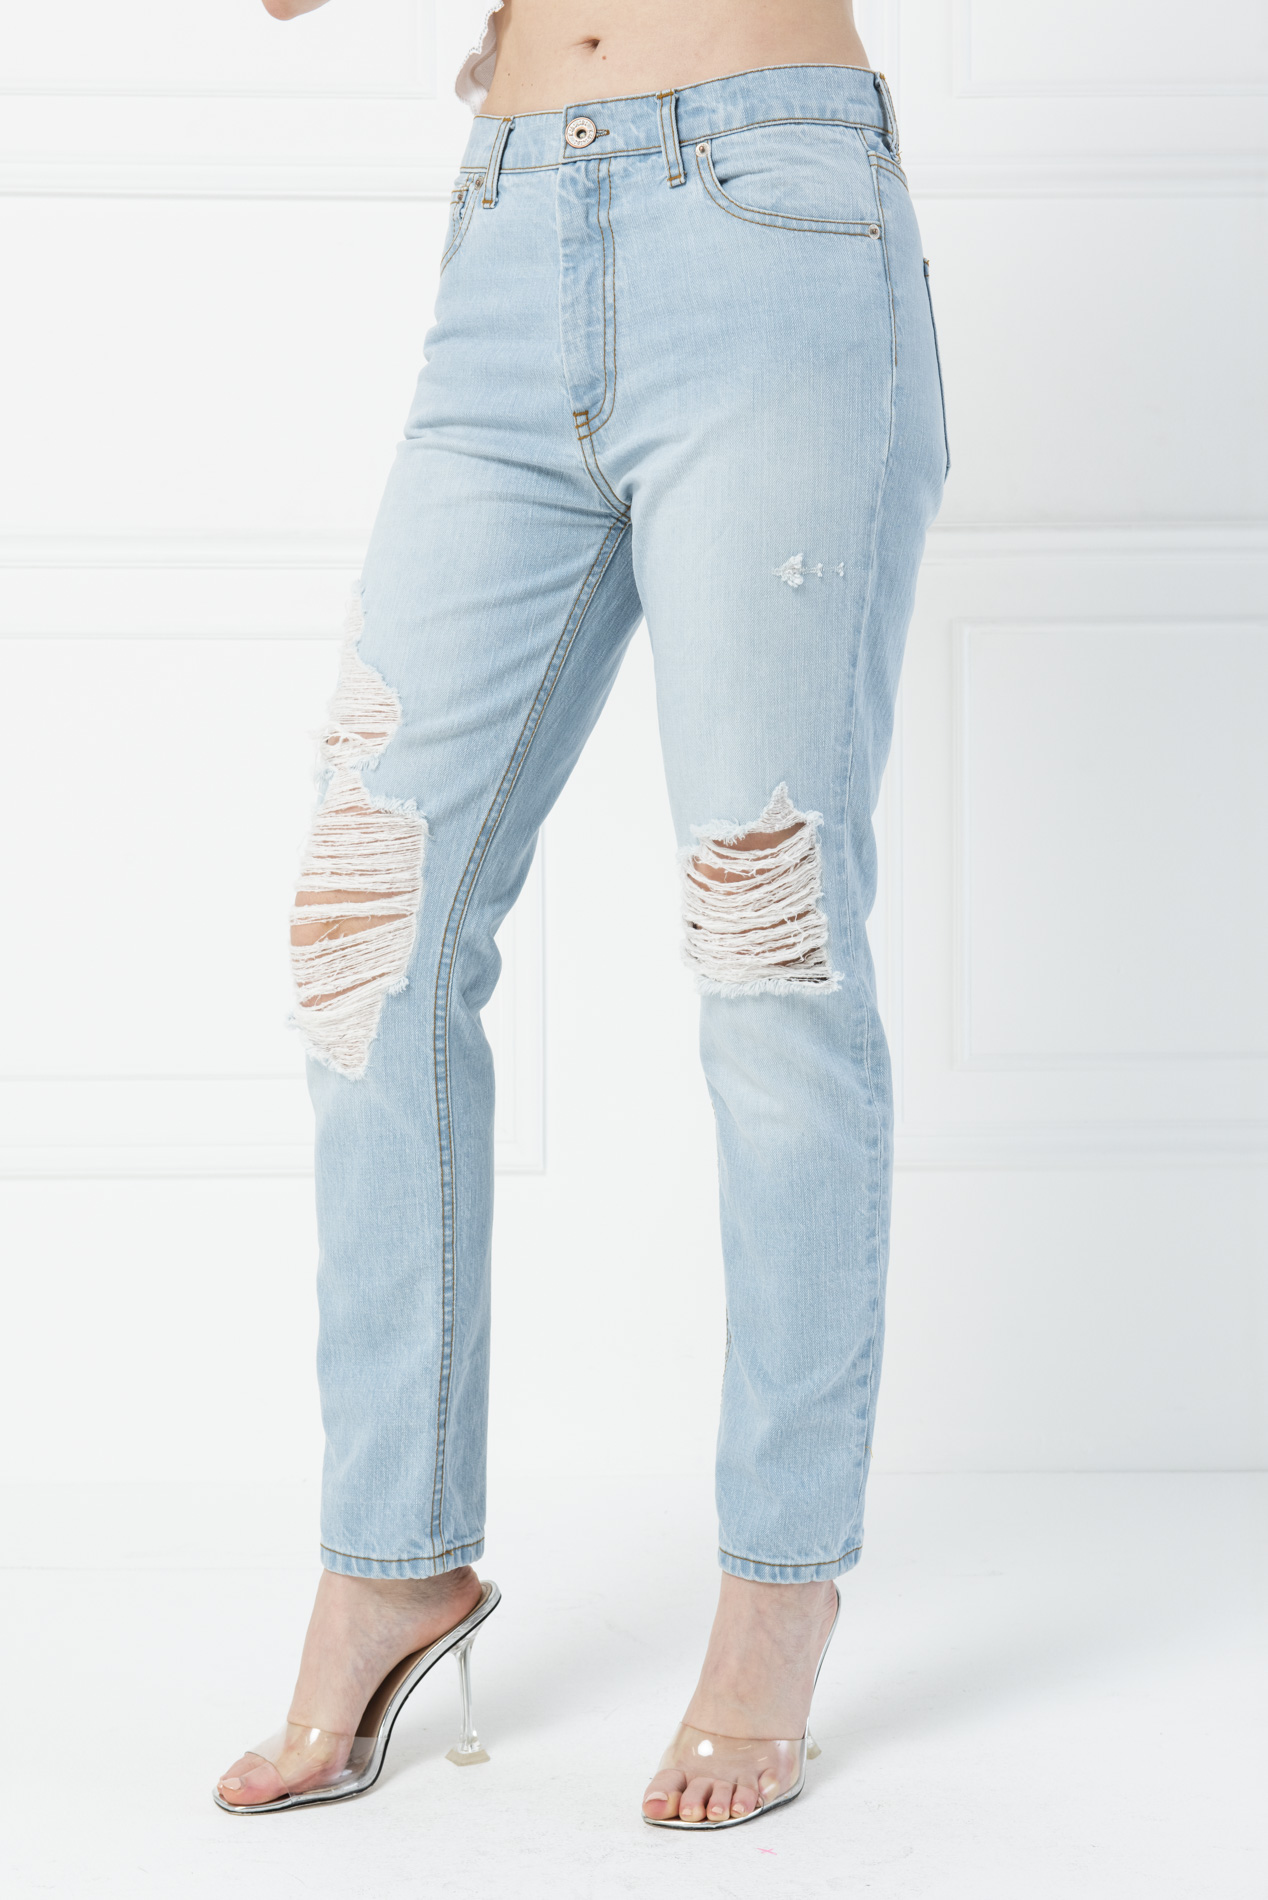 ice blue jeans